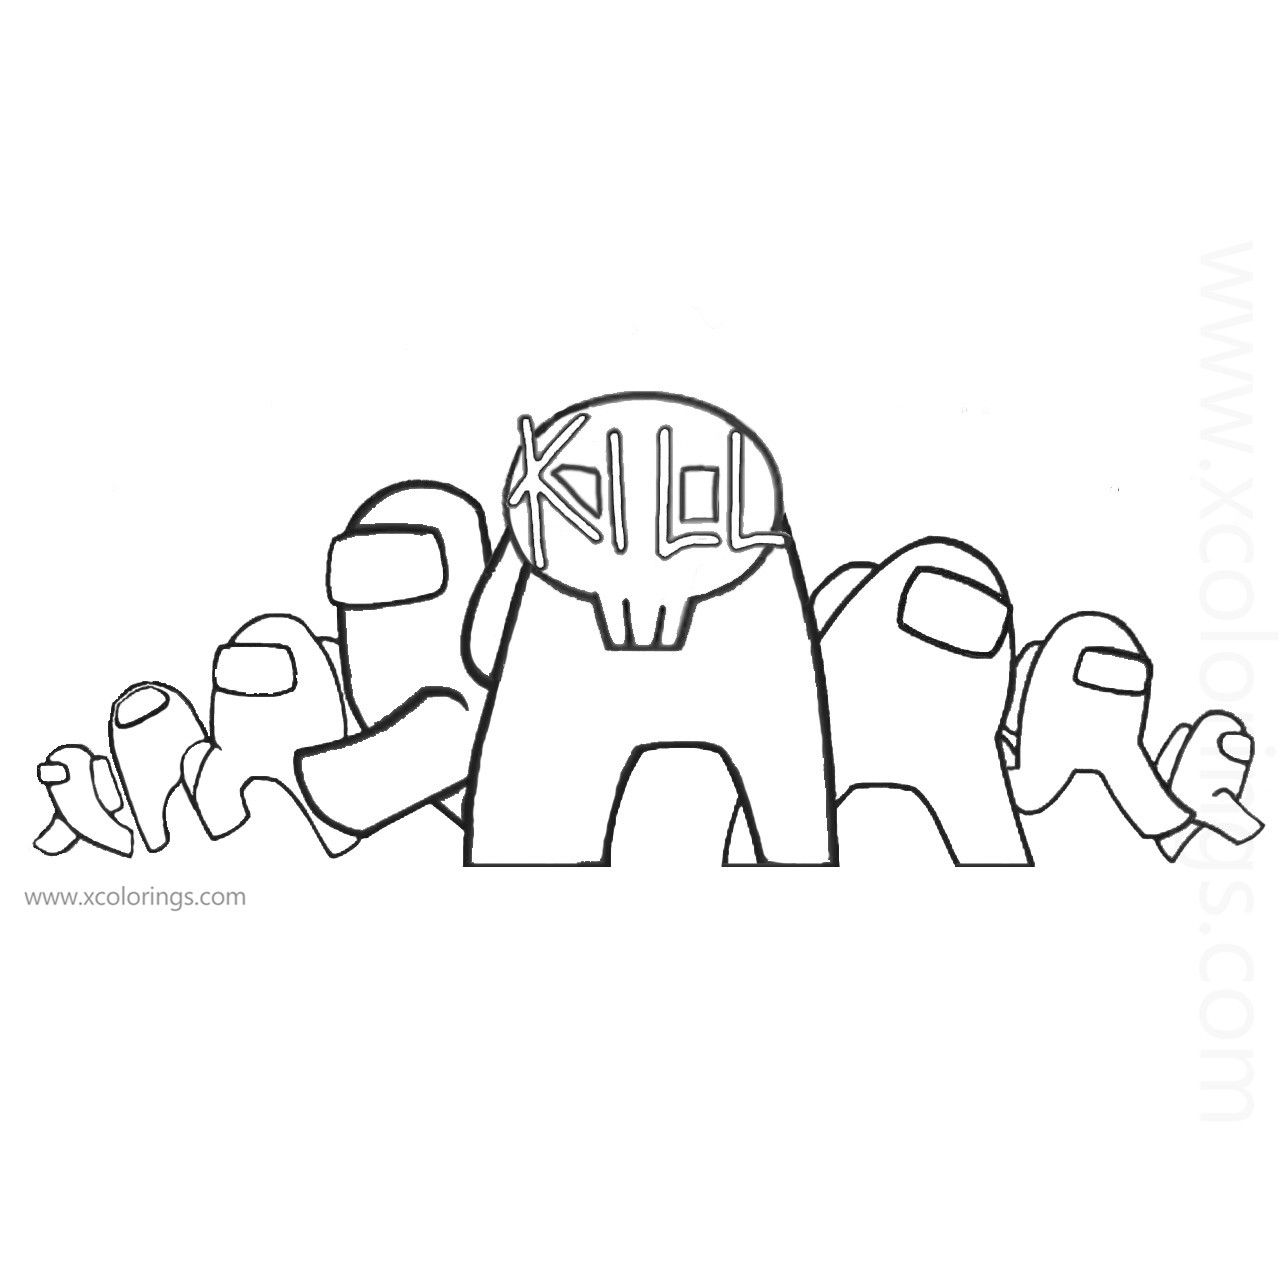 Among Us Coloring Pages Cat - XColorings.com